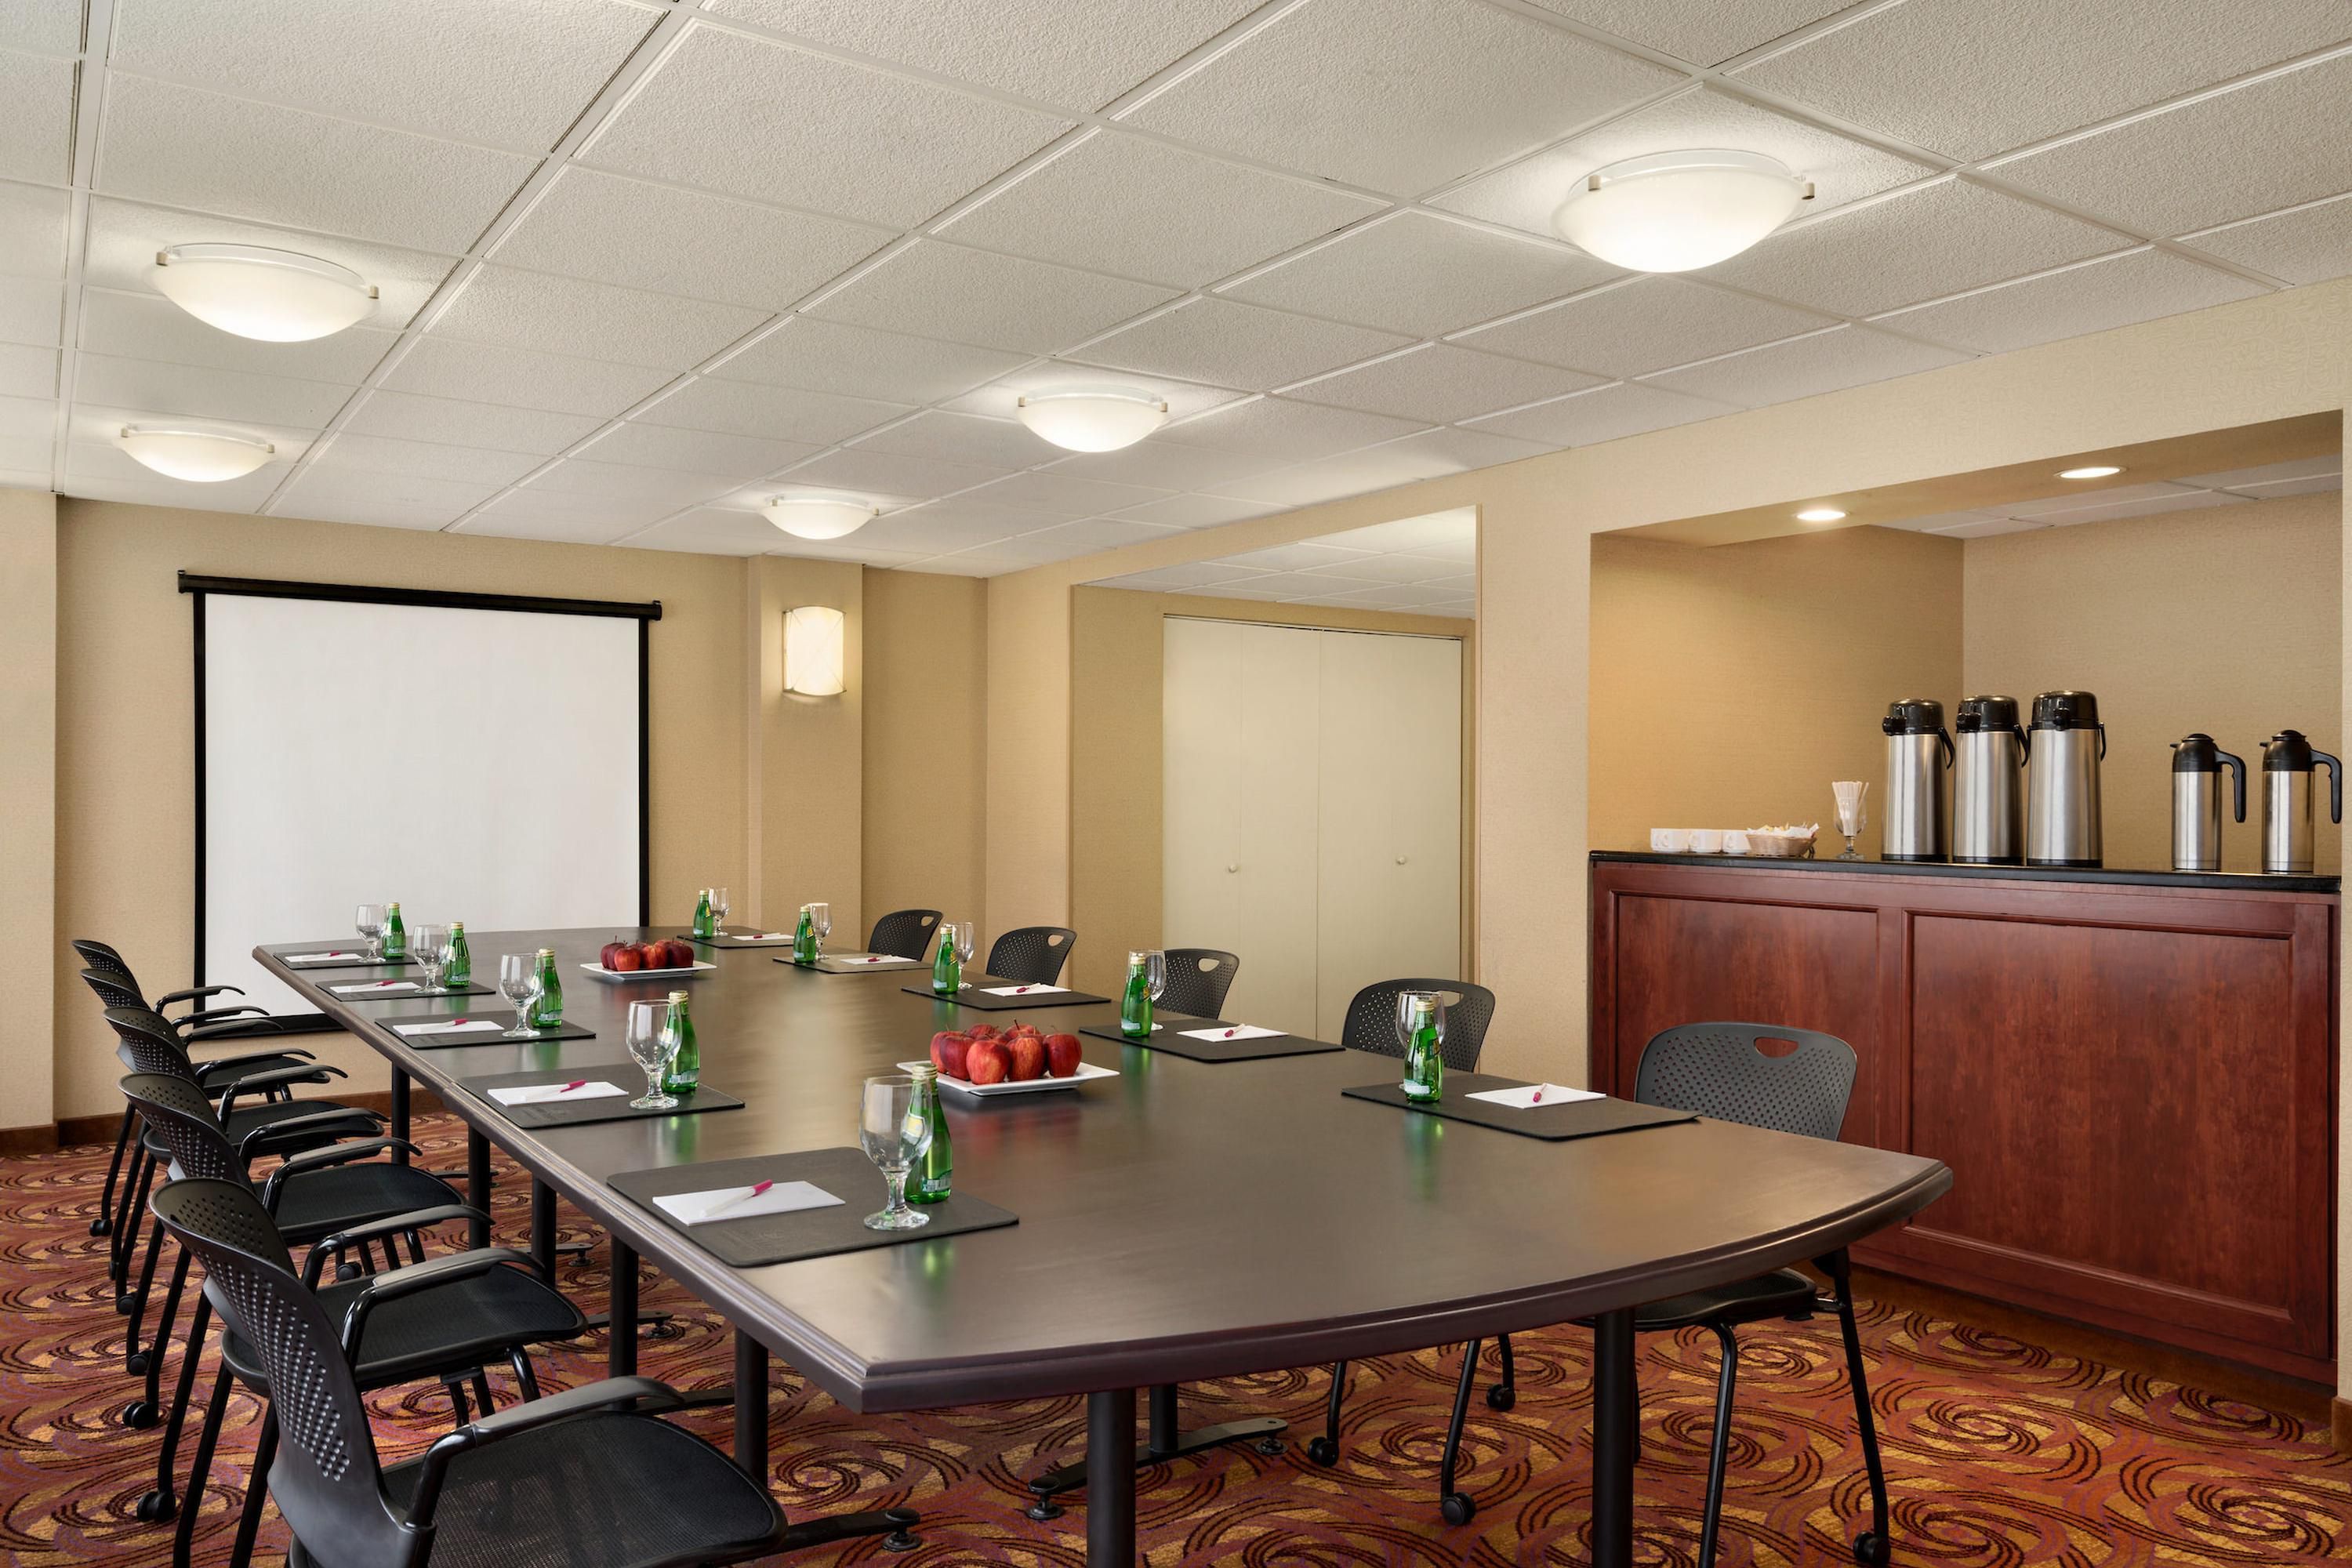 Plan your next small meeting in our Board Room in Englewood NJ.